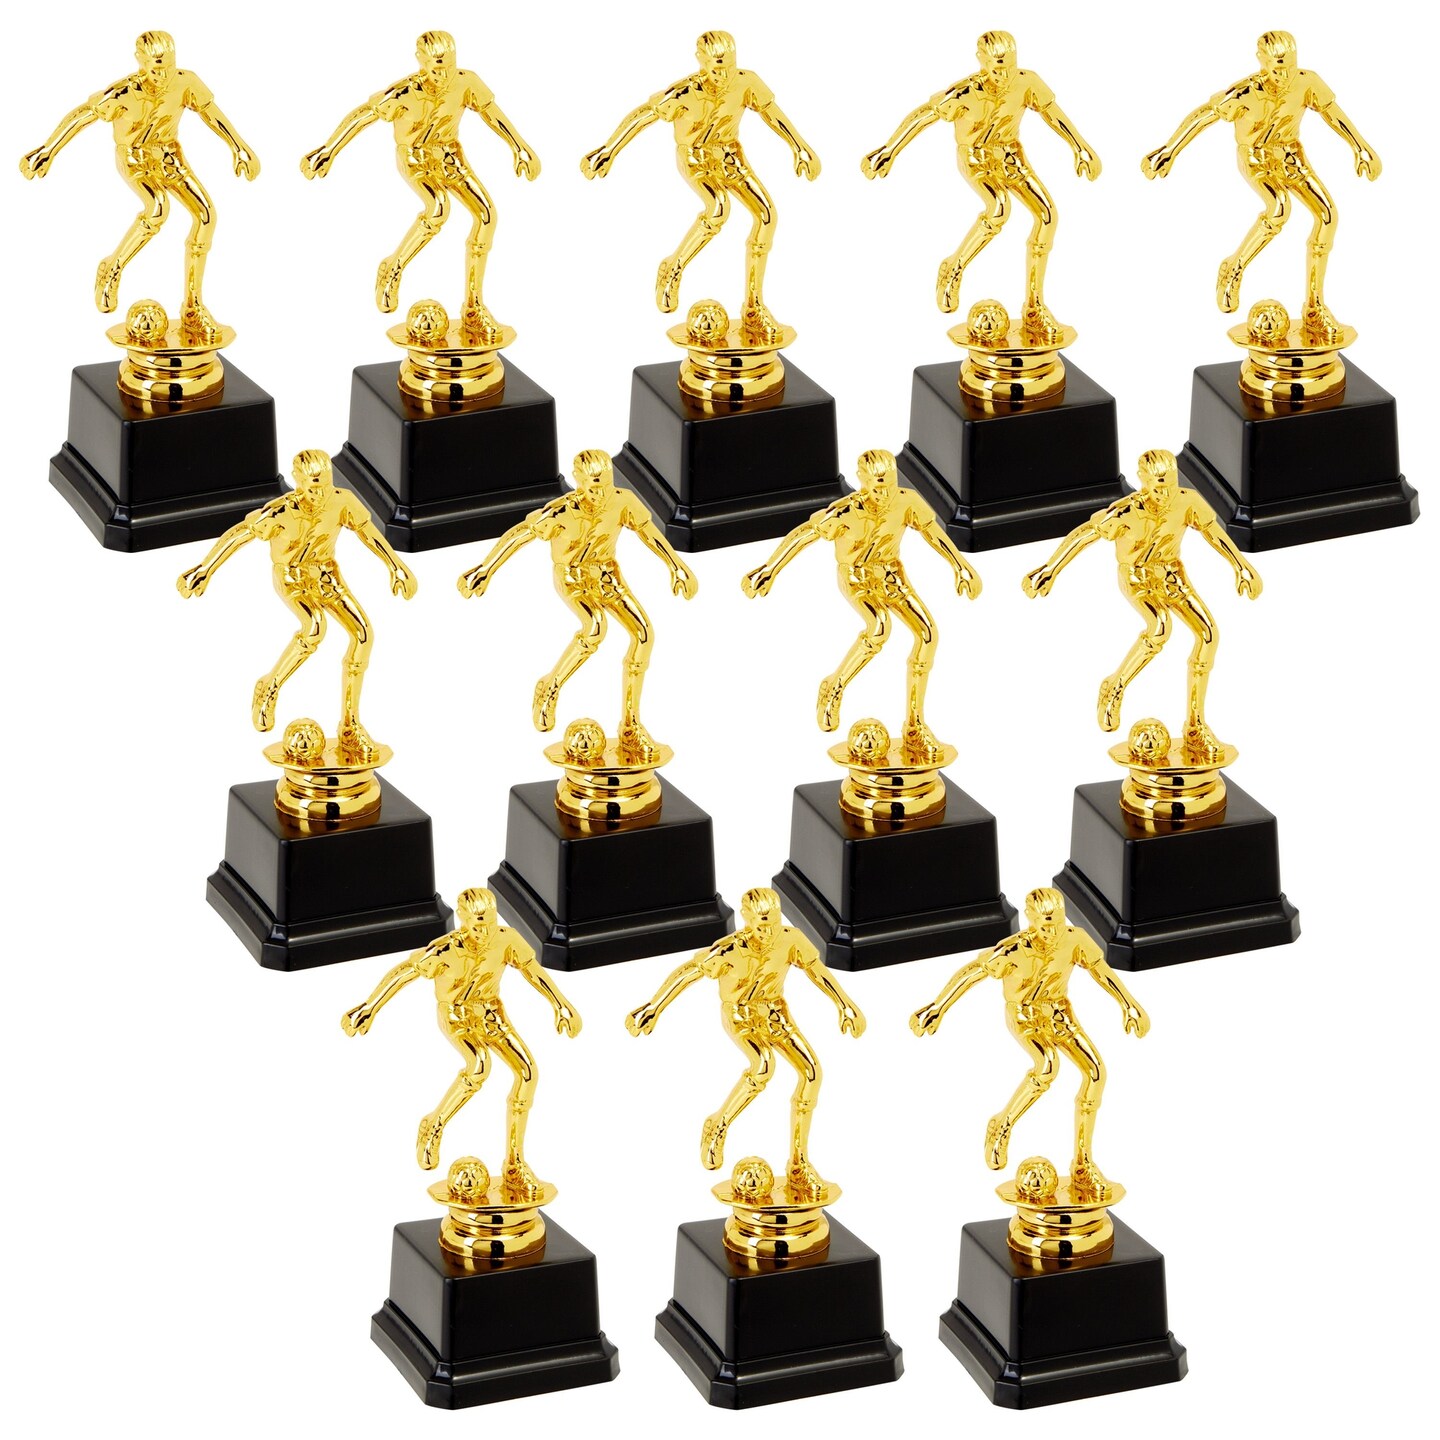 Small Gold Soccer Trophies for All Ages Award Ceremonies, Tournaments, Championship Games, Sports Competitions (2.5 x 6.0 In, 12 Pack)